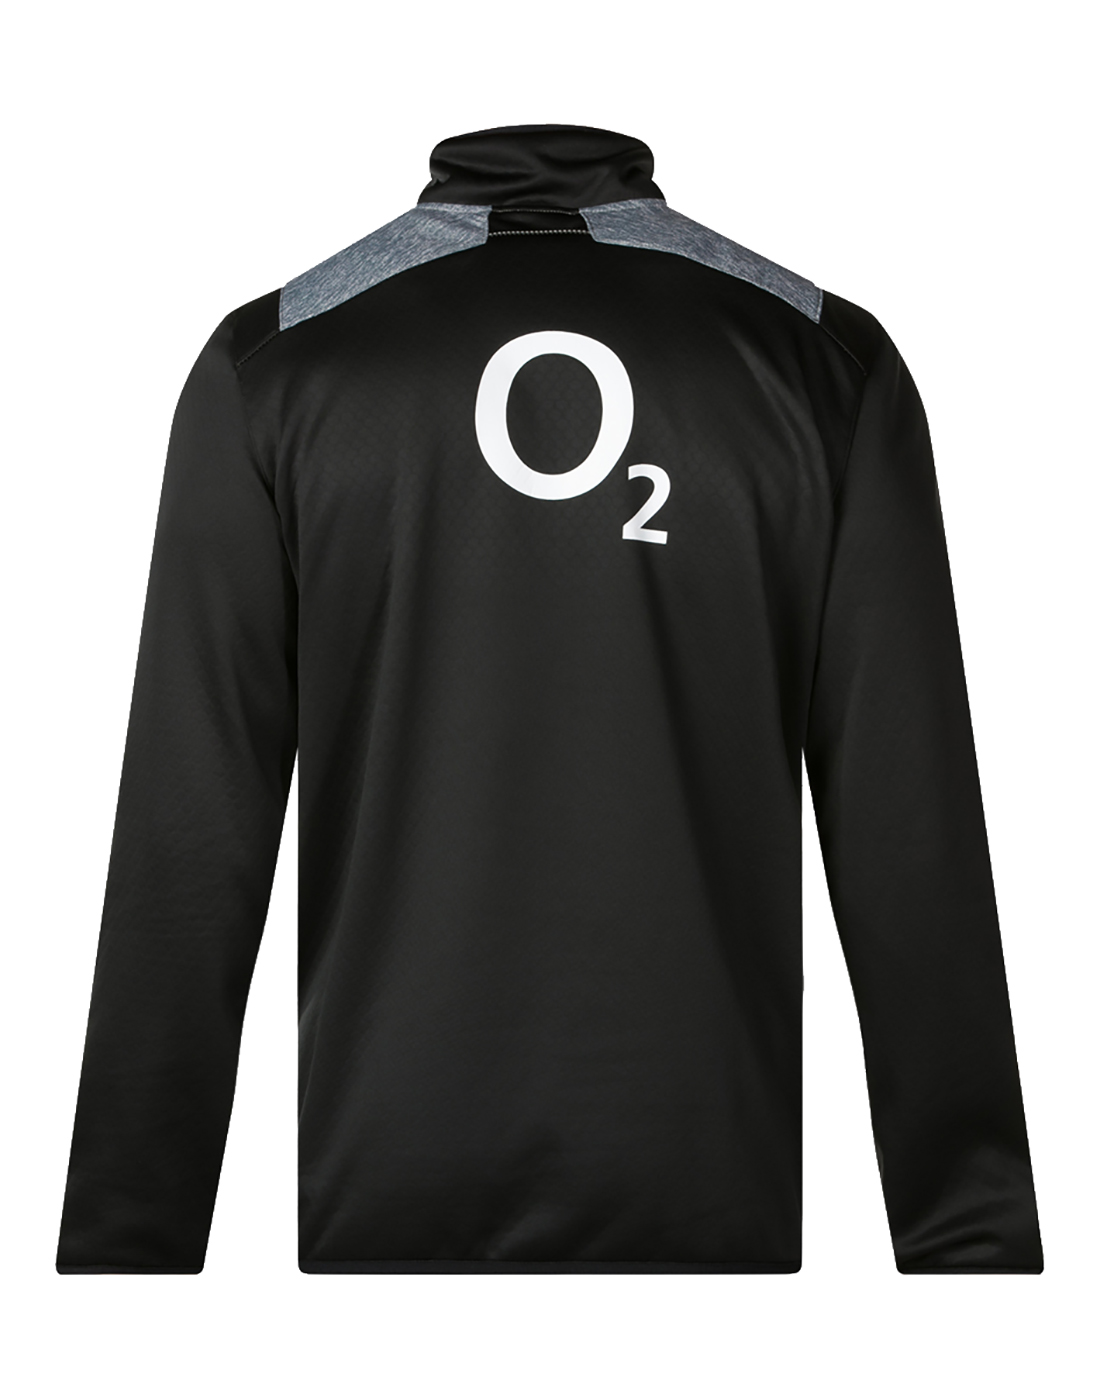 inspanning lijden 鍔 Canterbury Adults England Thermo QZ Top - Black | Life Style Sports IE